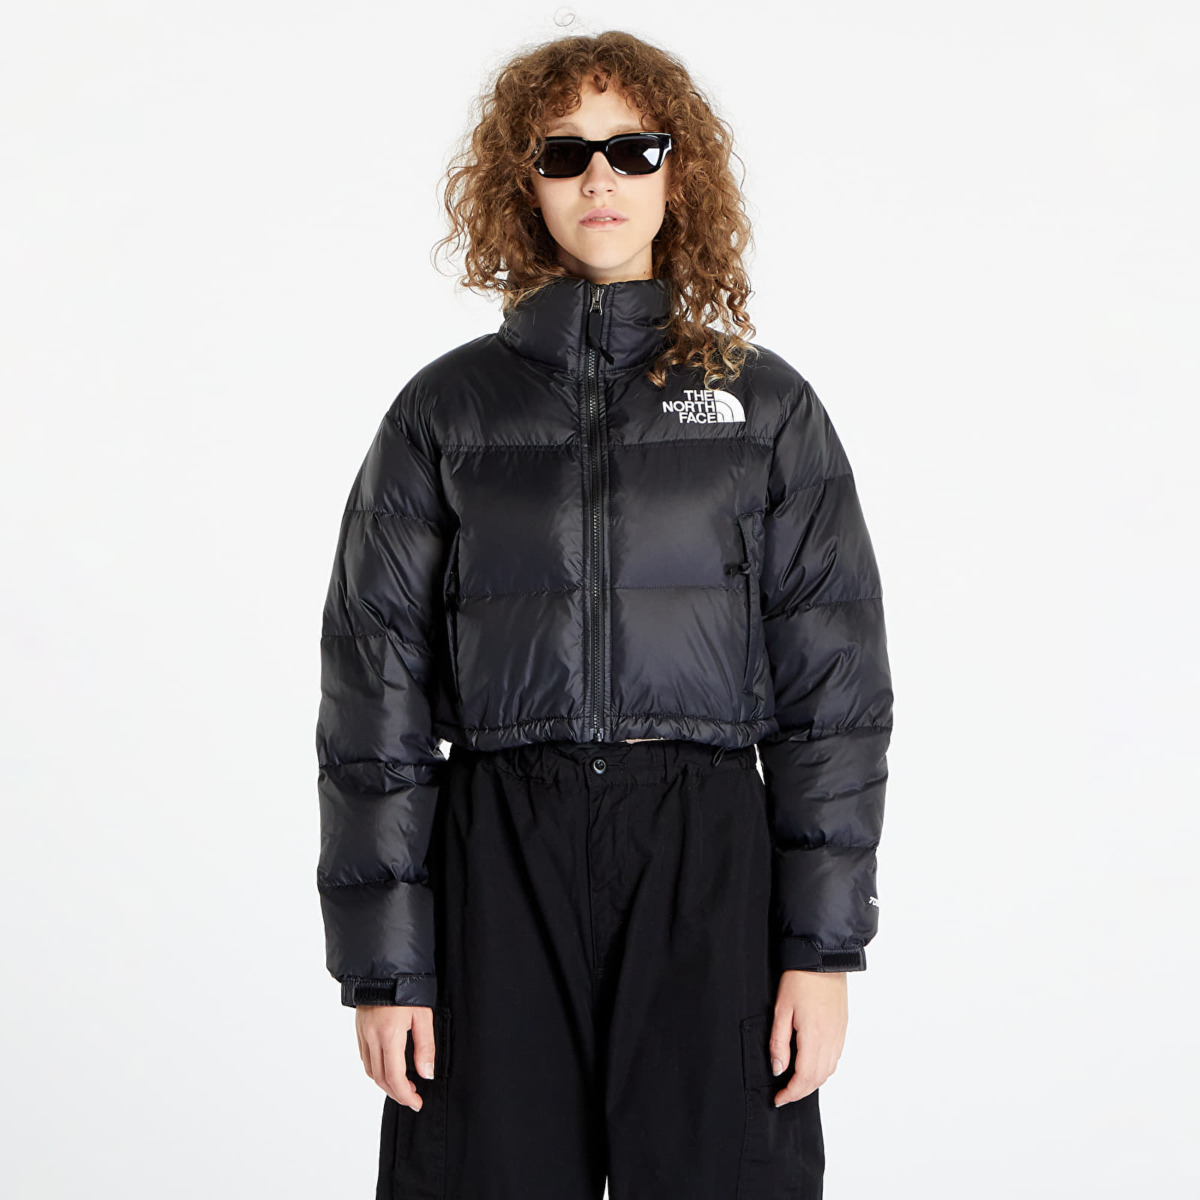 The North Face - Lady Jacket in White by Footshop GOOFASH